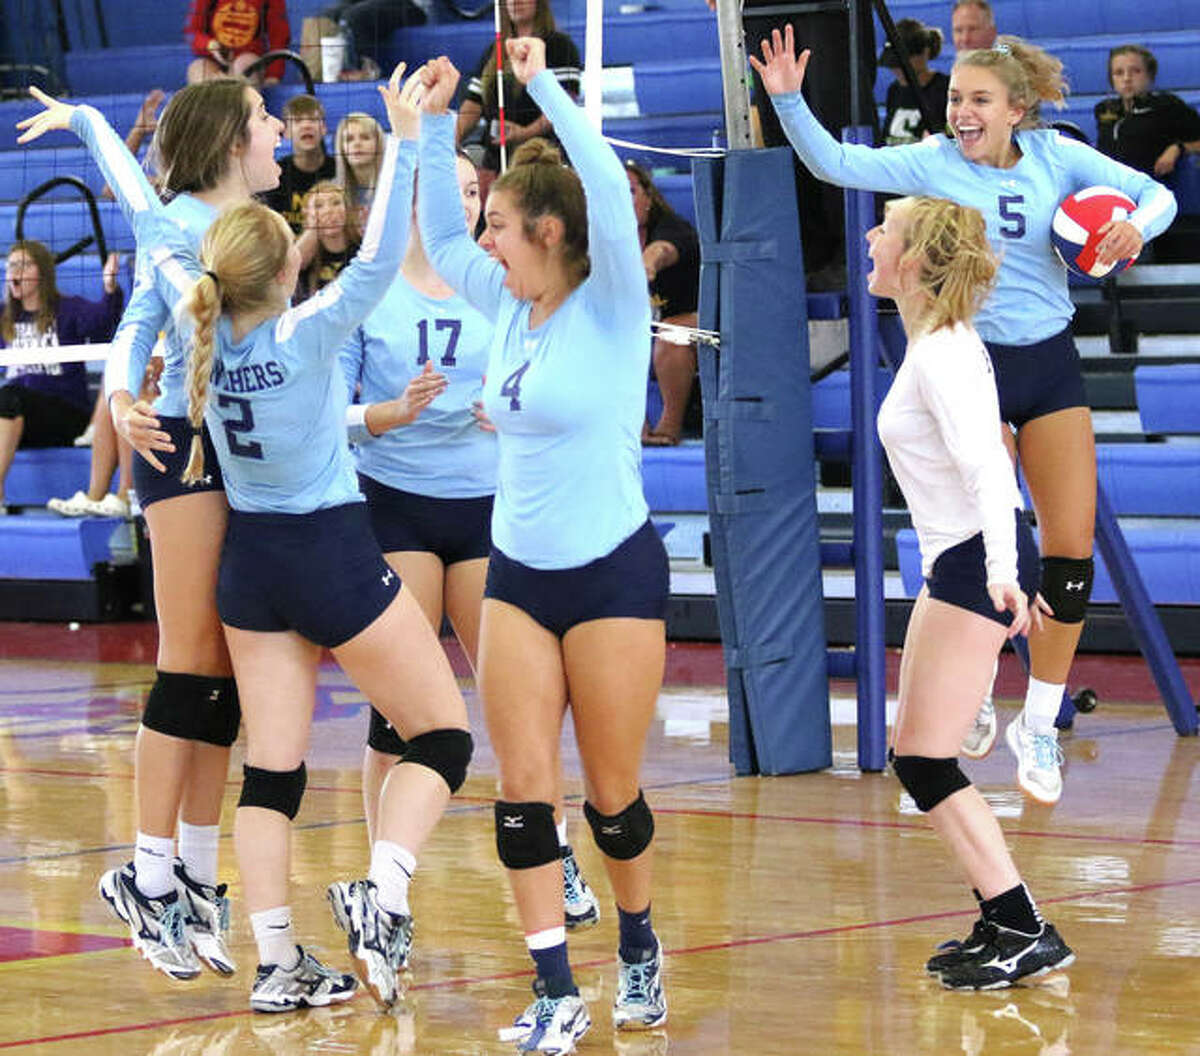 Jersey’s (from left) Abby Manns, Sally Hudson (2), Boston Talley (17), Bella Metzler (4), Sydney Gillis and Clare Breden (5) celebrate the final point of their three-set championship victory over CM on Saturday at the Roxana Tourney.